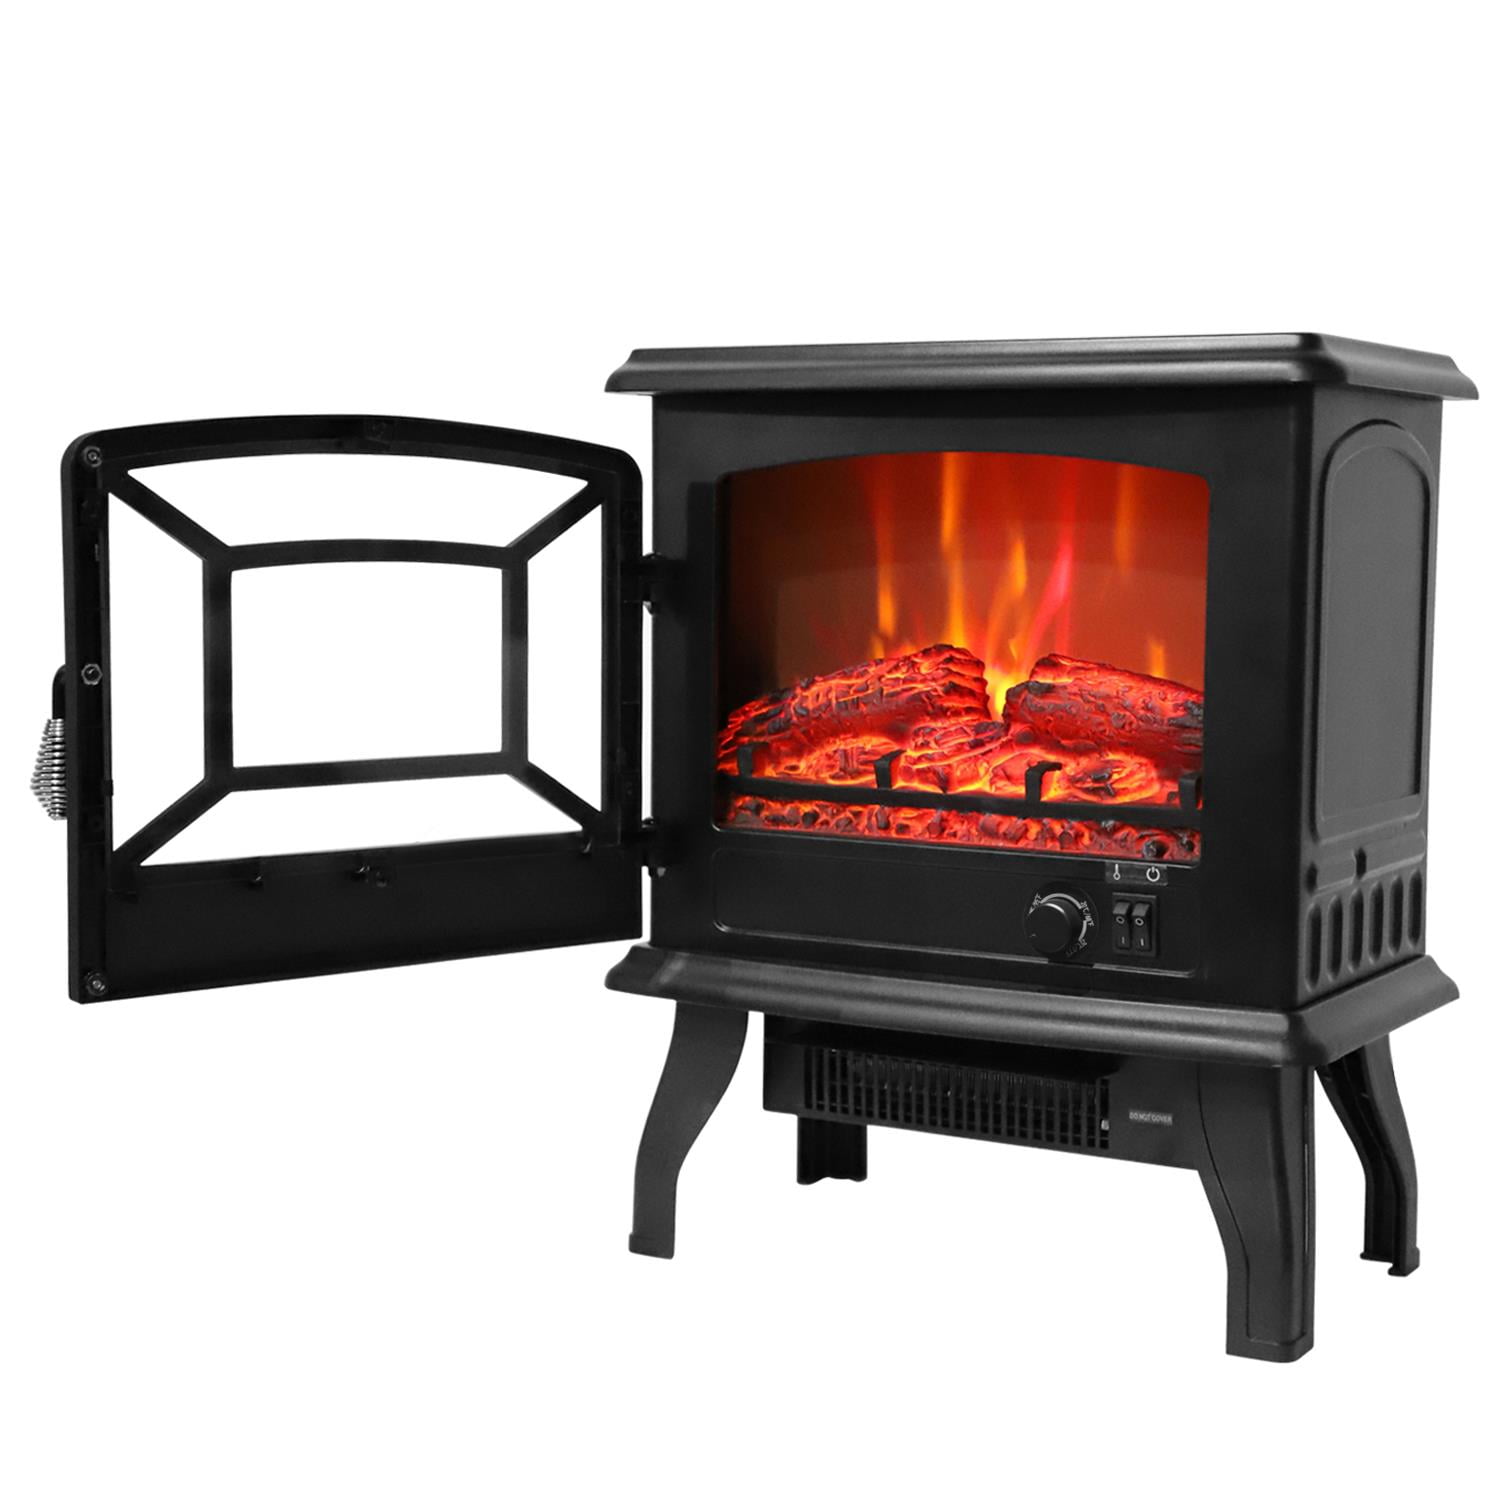 Ktaxon 17 Small Electric Fireplace, Best Small Freestanding Electric Fireplace